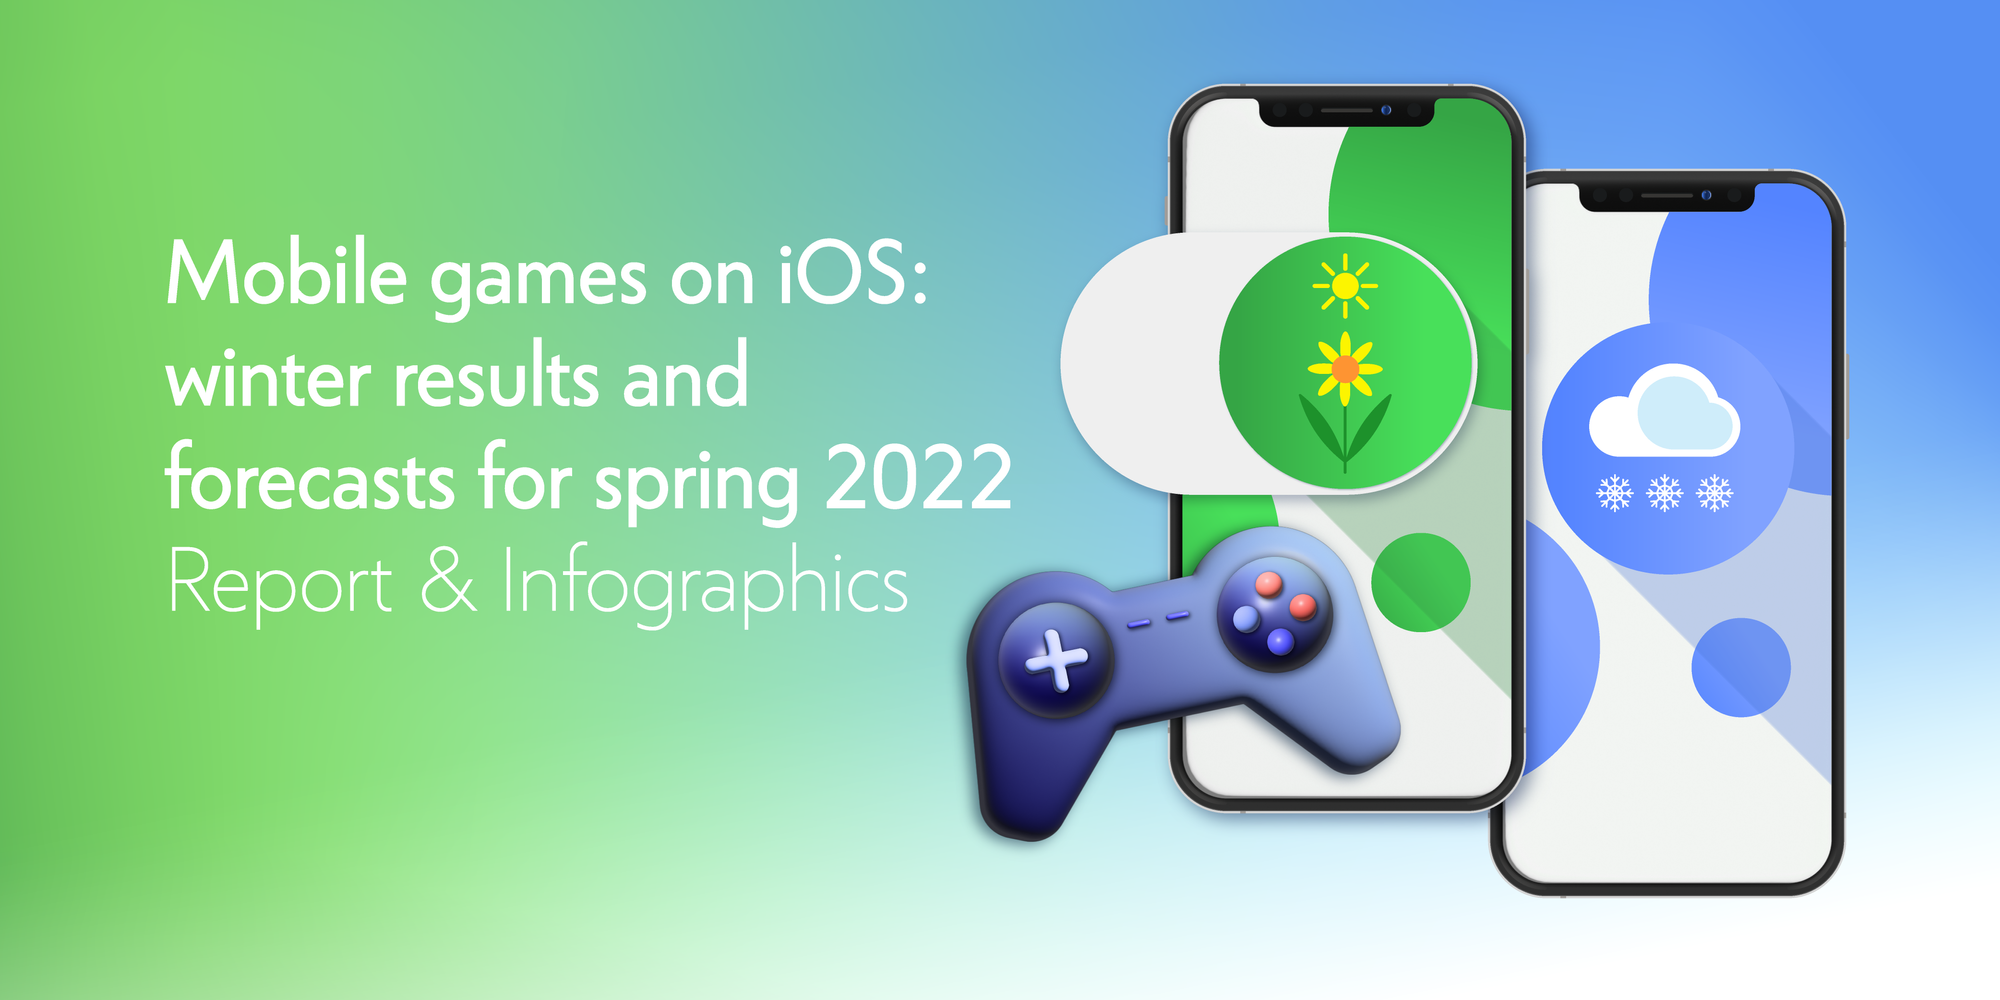 Mobile games on iOS: winter results and forecasts for spring 2022